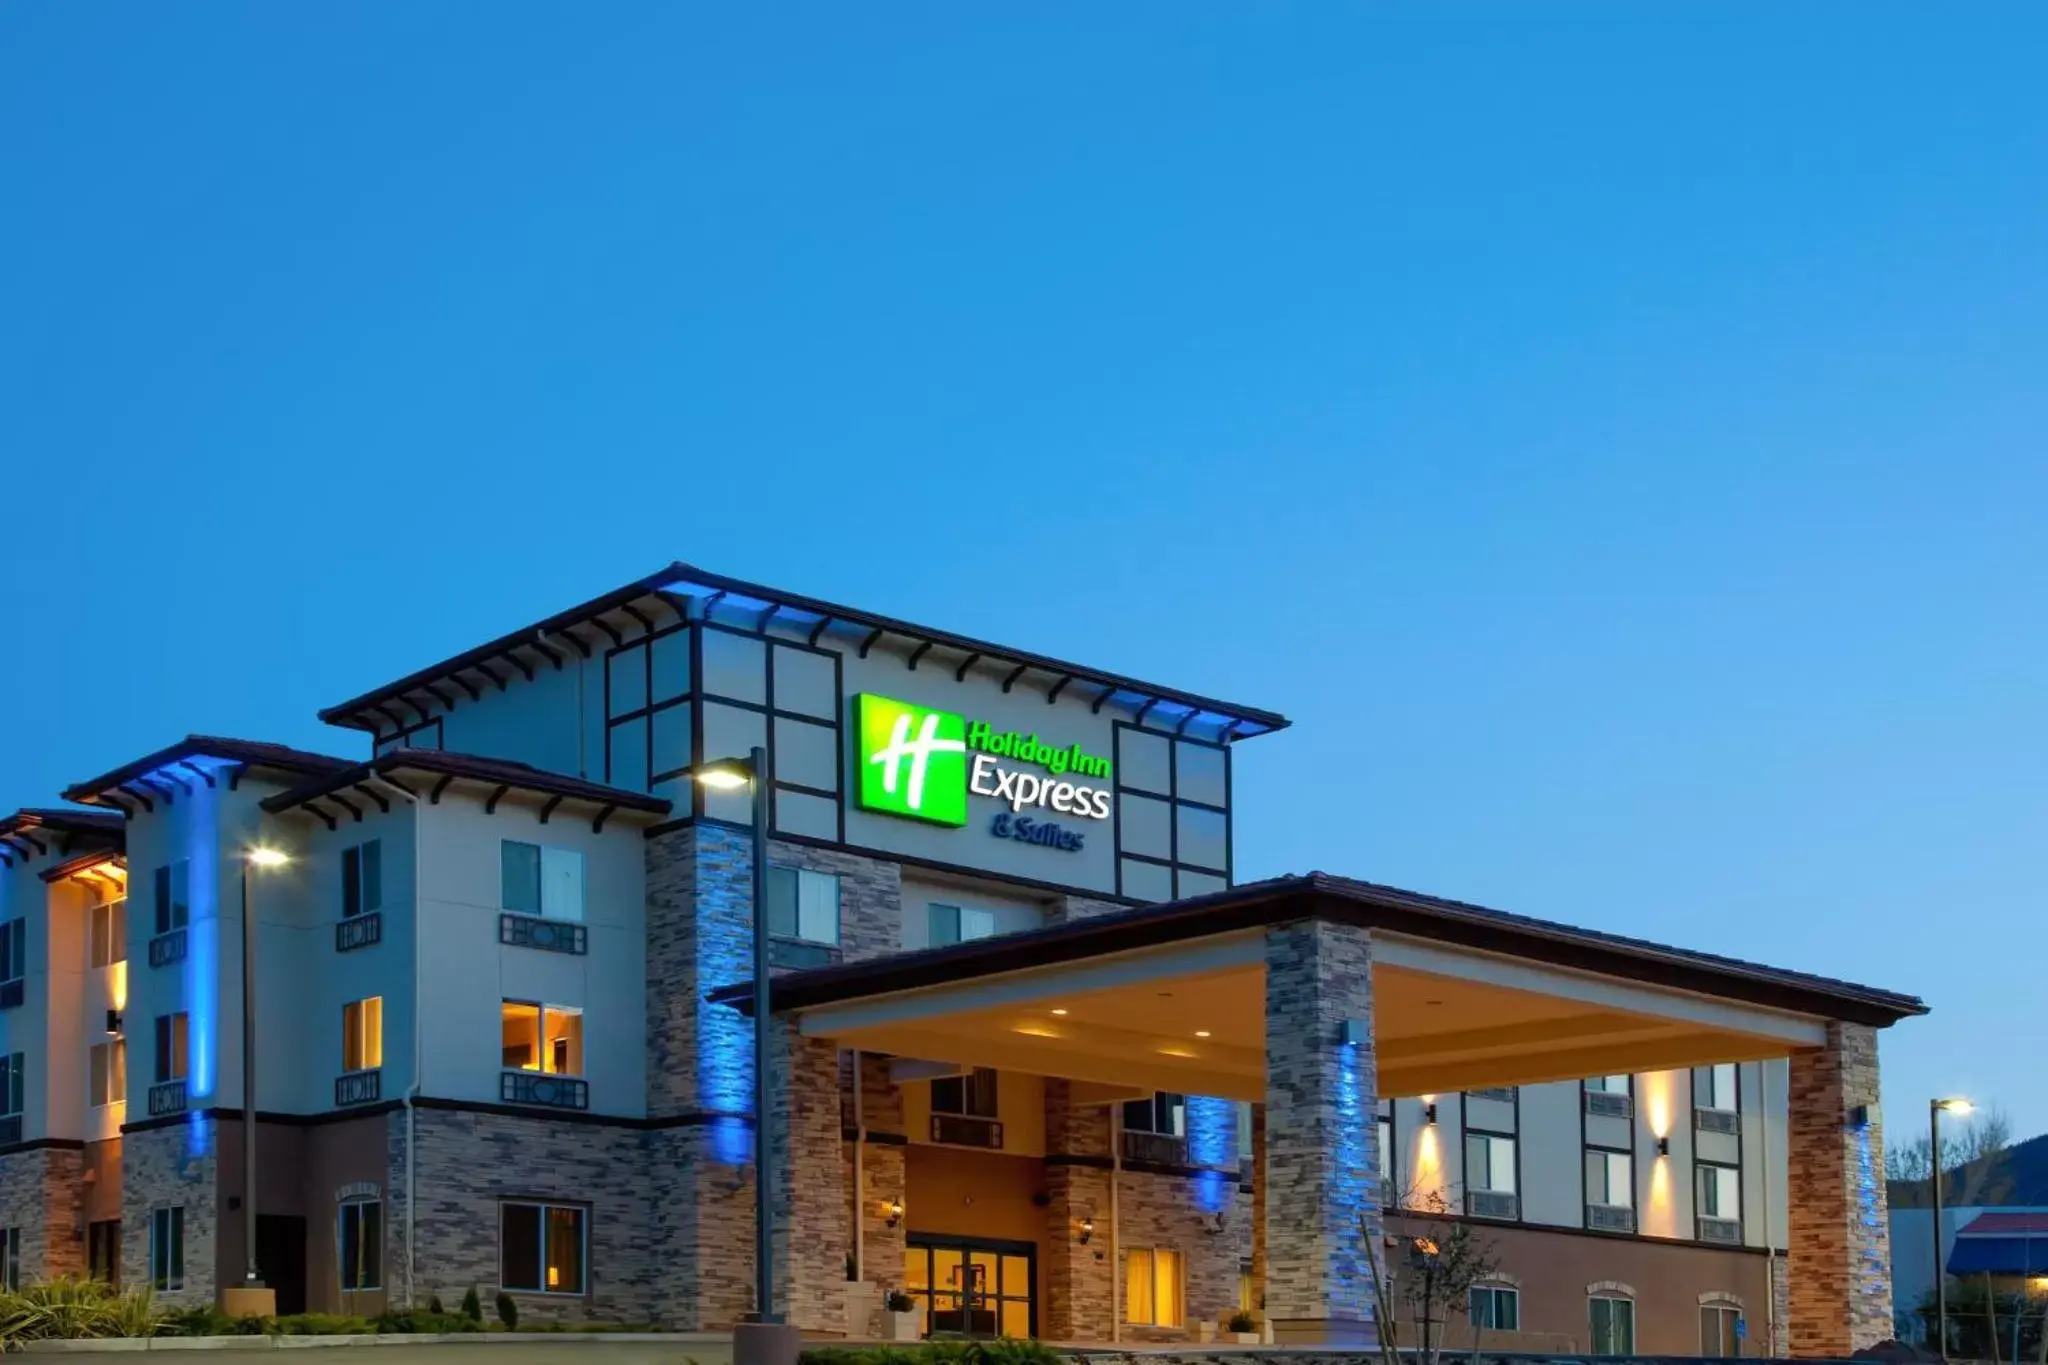 Property Building in Holiday Inn Express & Suites Frazier Park, An IHG Hotel